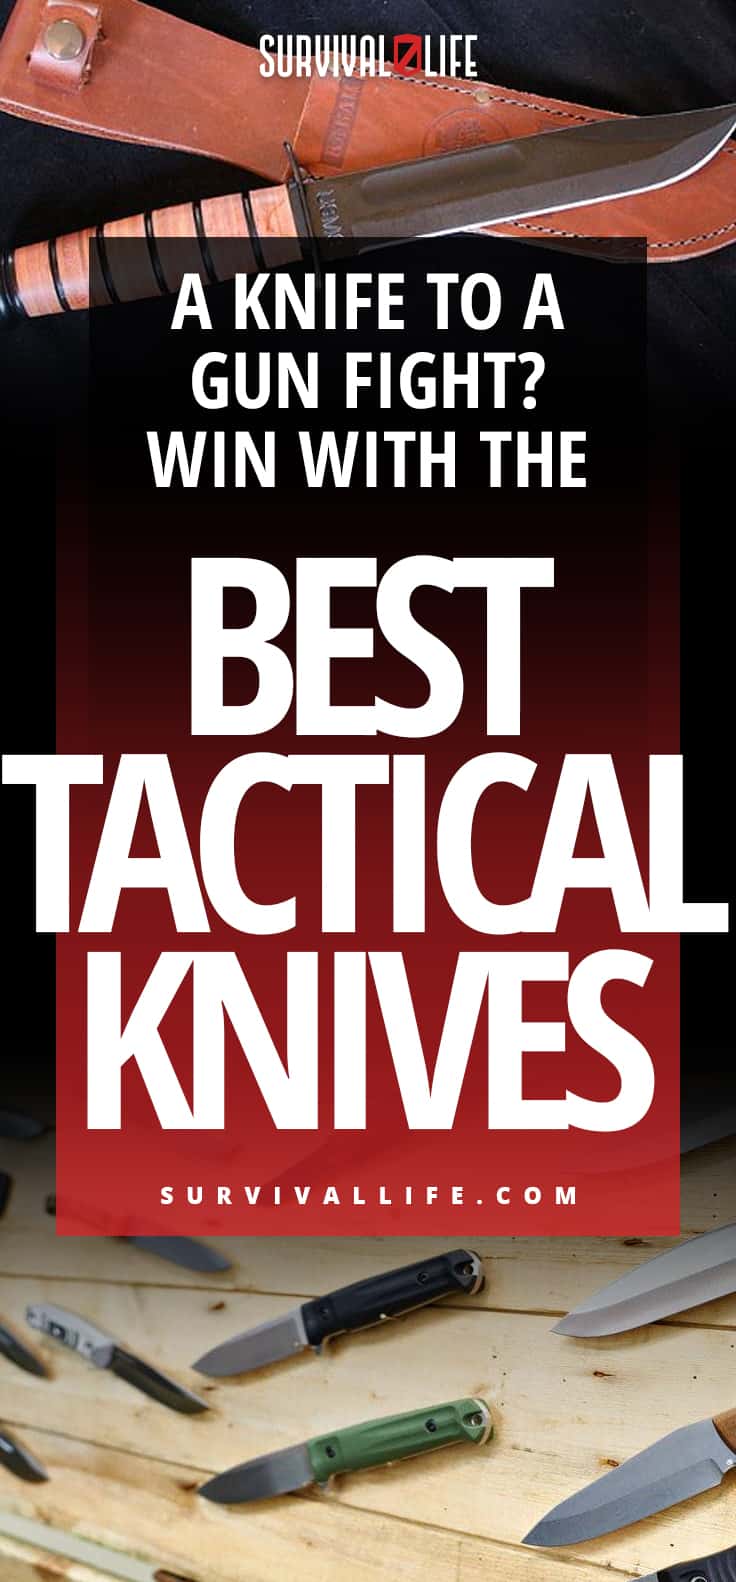 A Knife To A Gun Fight? Win With The Best Tactical Knives